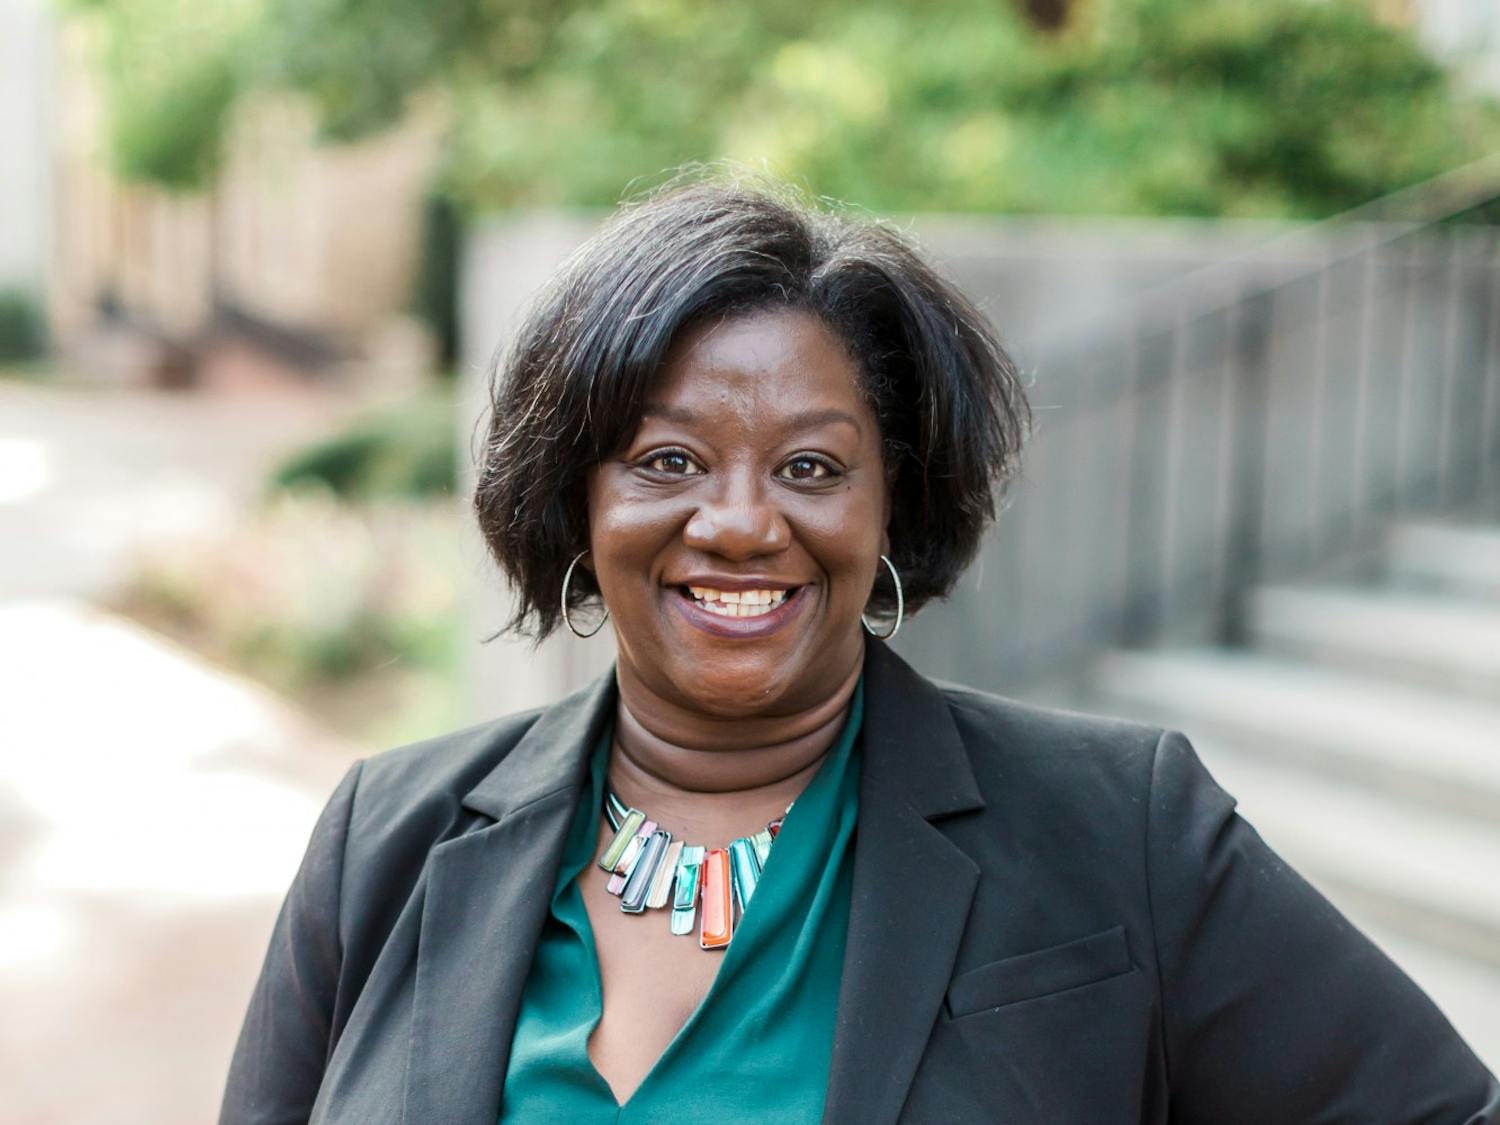 Tressie McMillan Cottom, an associate professor at the UNC School of Information and Library Science was named a MacArthur Fellow in the foundation's Class of 2020. Photo courtesy of John D. and Catherine T. MacArthur Foundation.